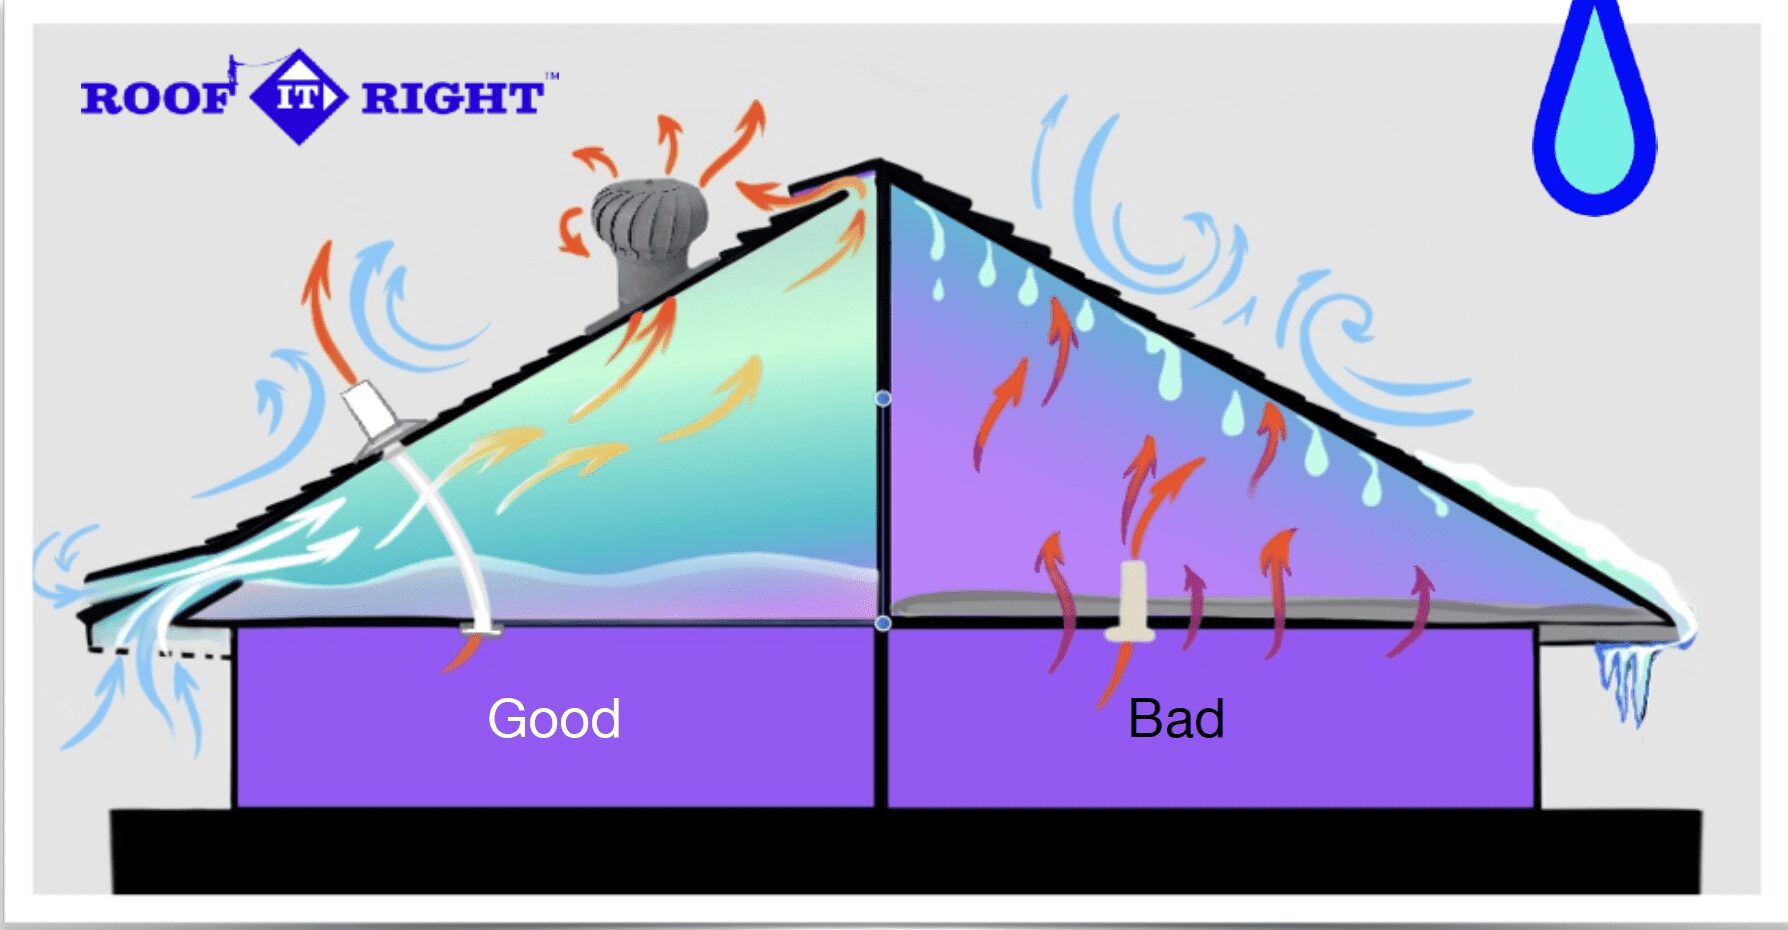 Good vs bad roof with heat escape